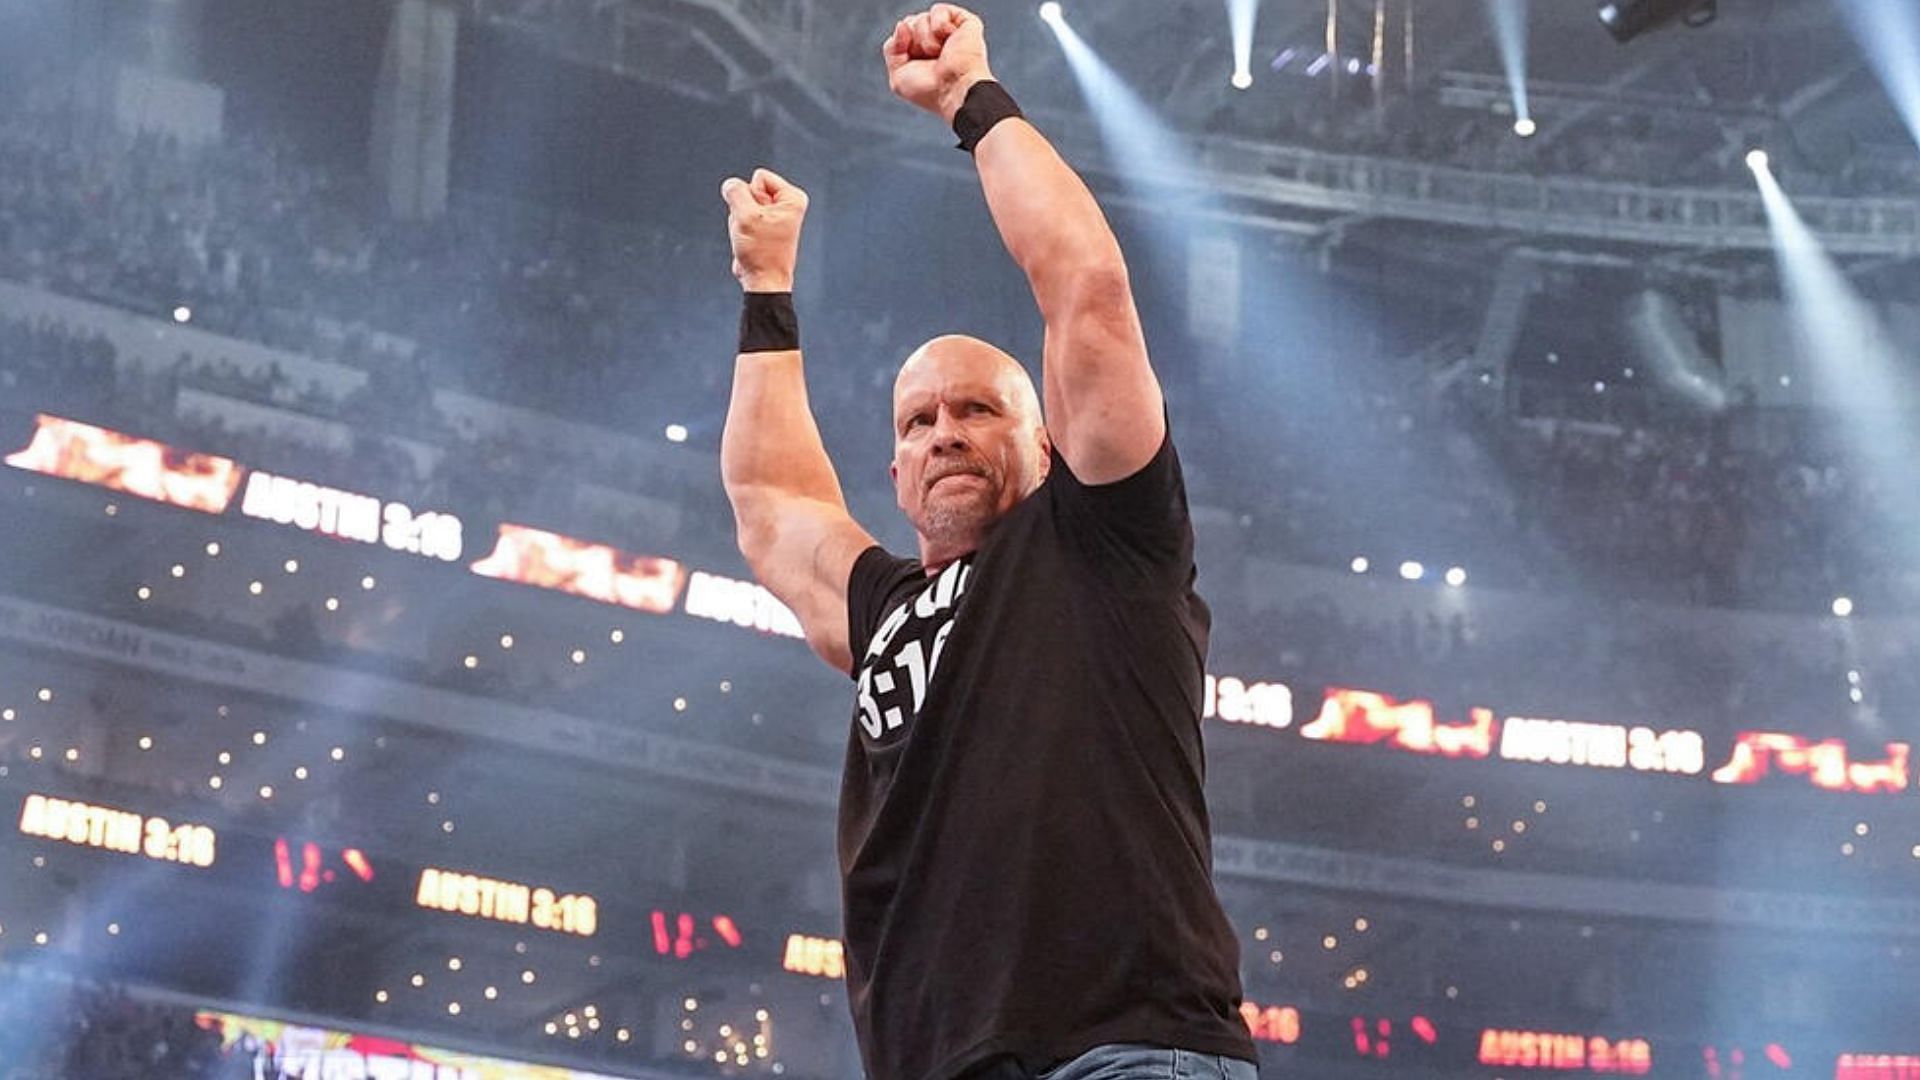 Stone Cold Steve Austin was not present at WrestleMania 40